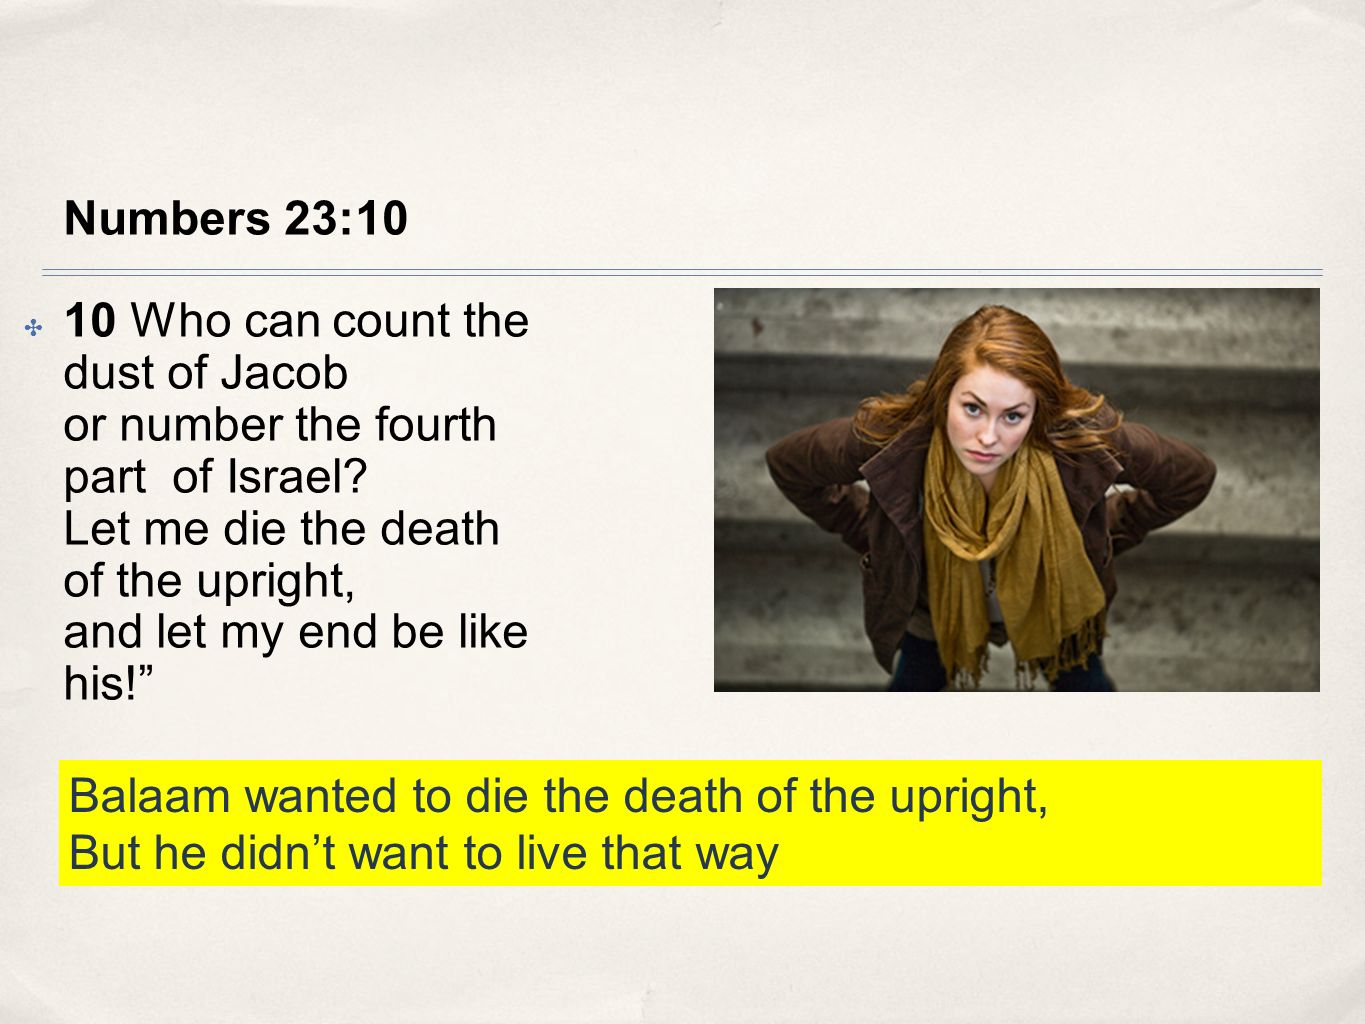 Balaam wanted to die the death of the upright,